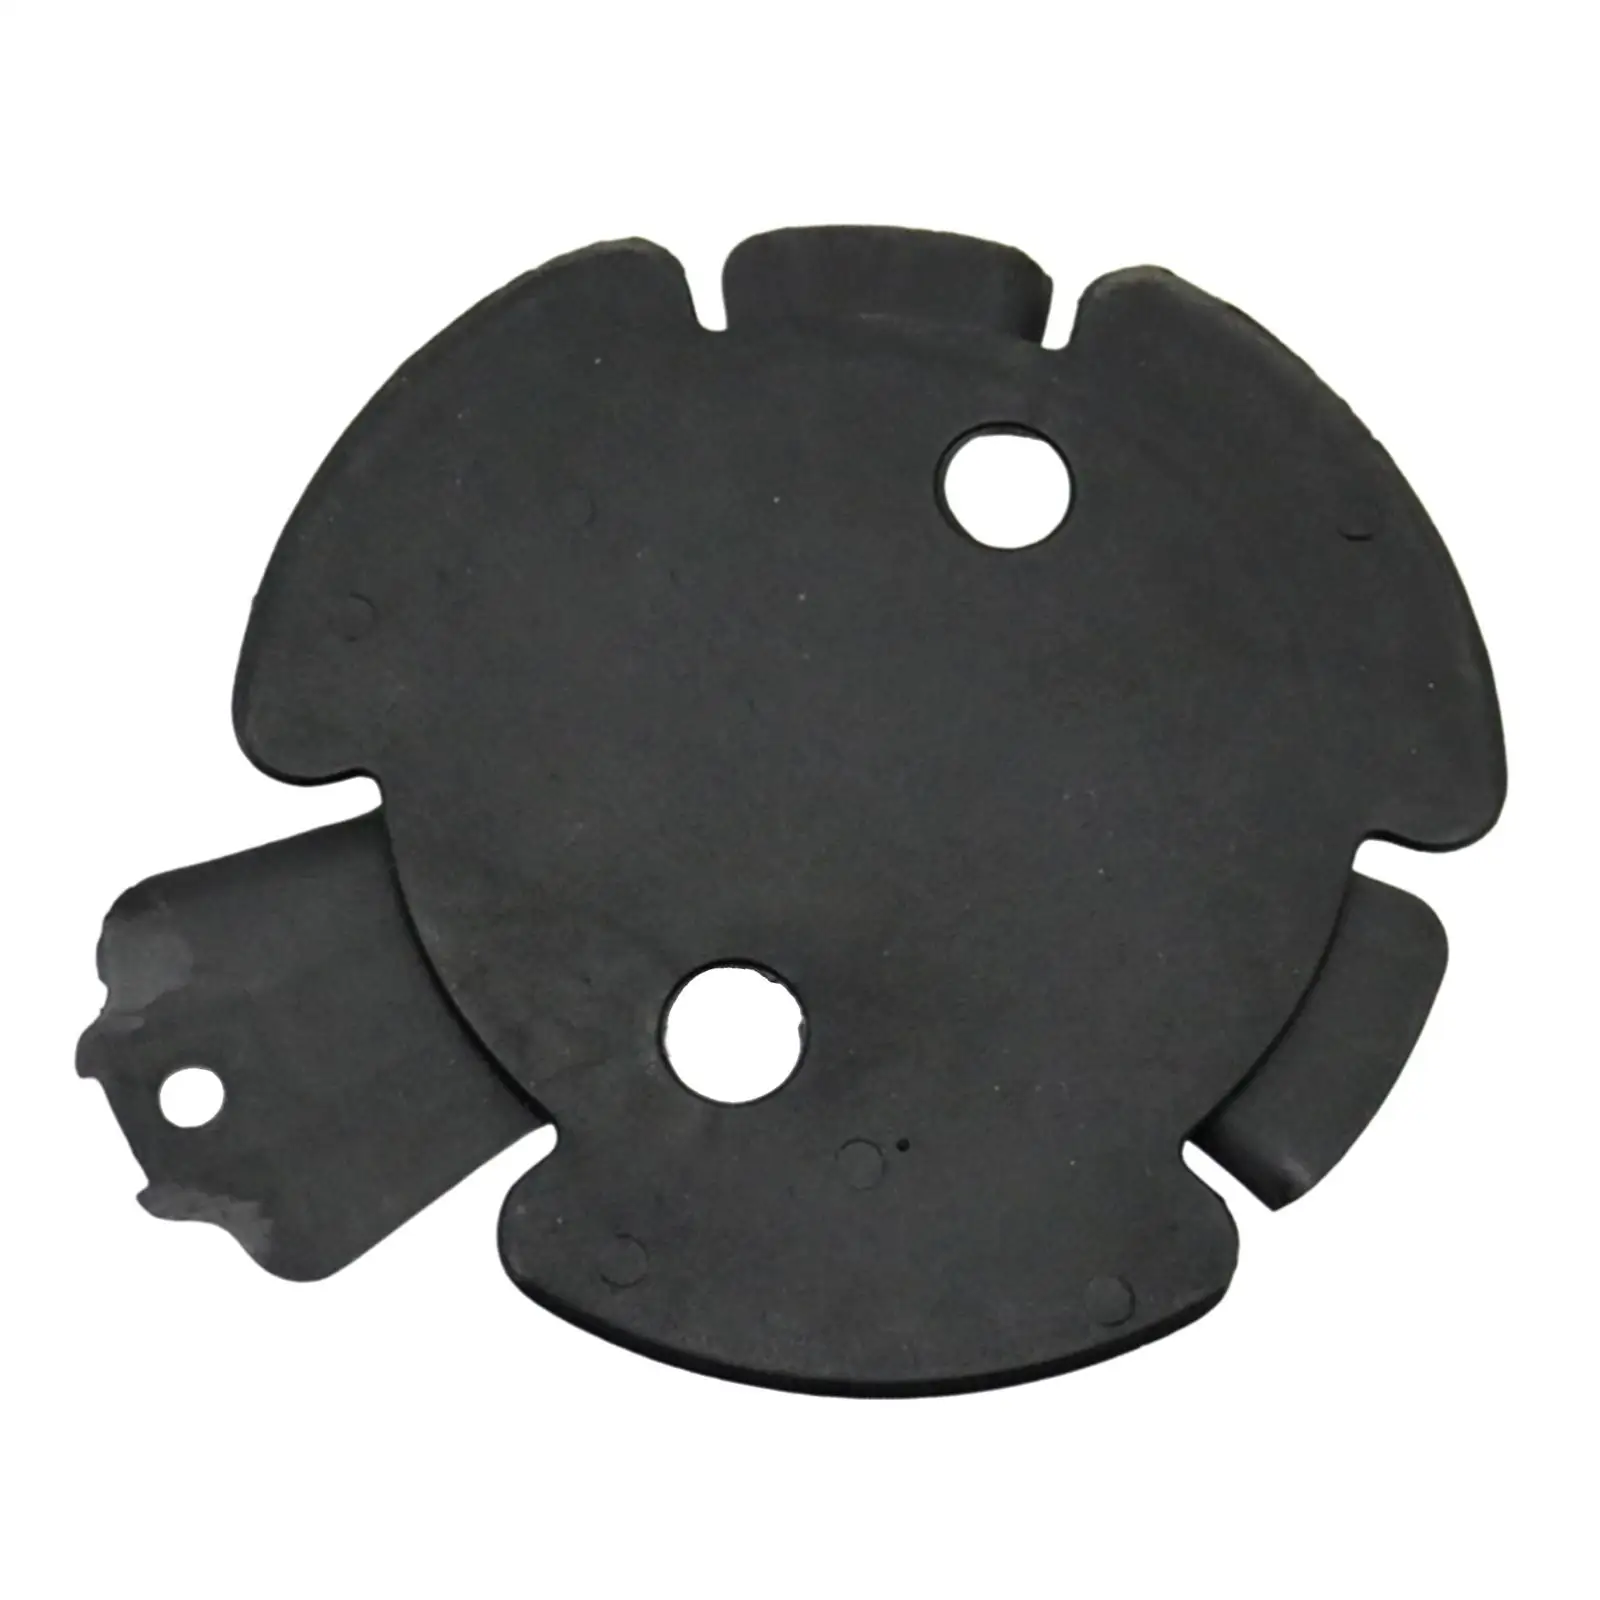 Oil Sump Underfloor Drain Cover Flap, 51757209541 Spare Parts Easy to Install